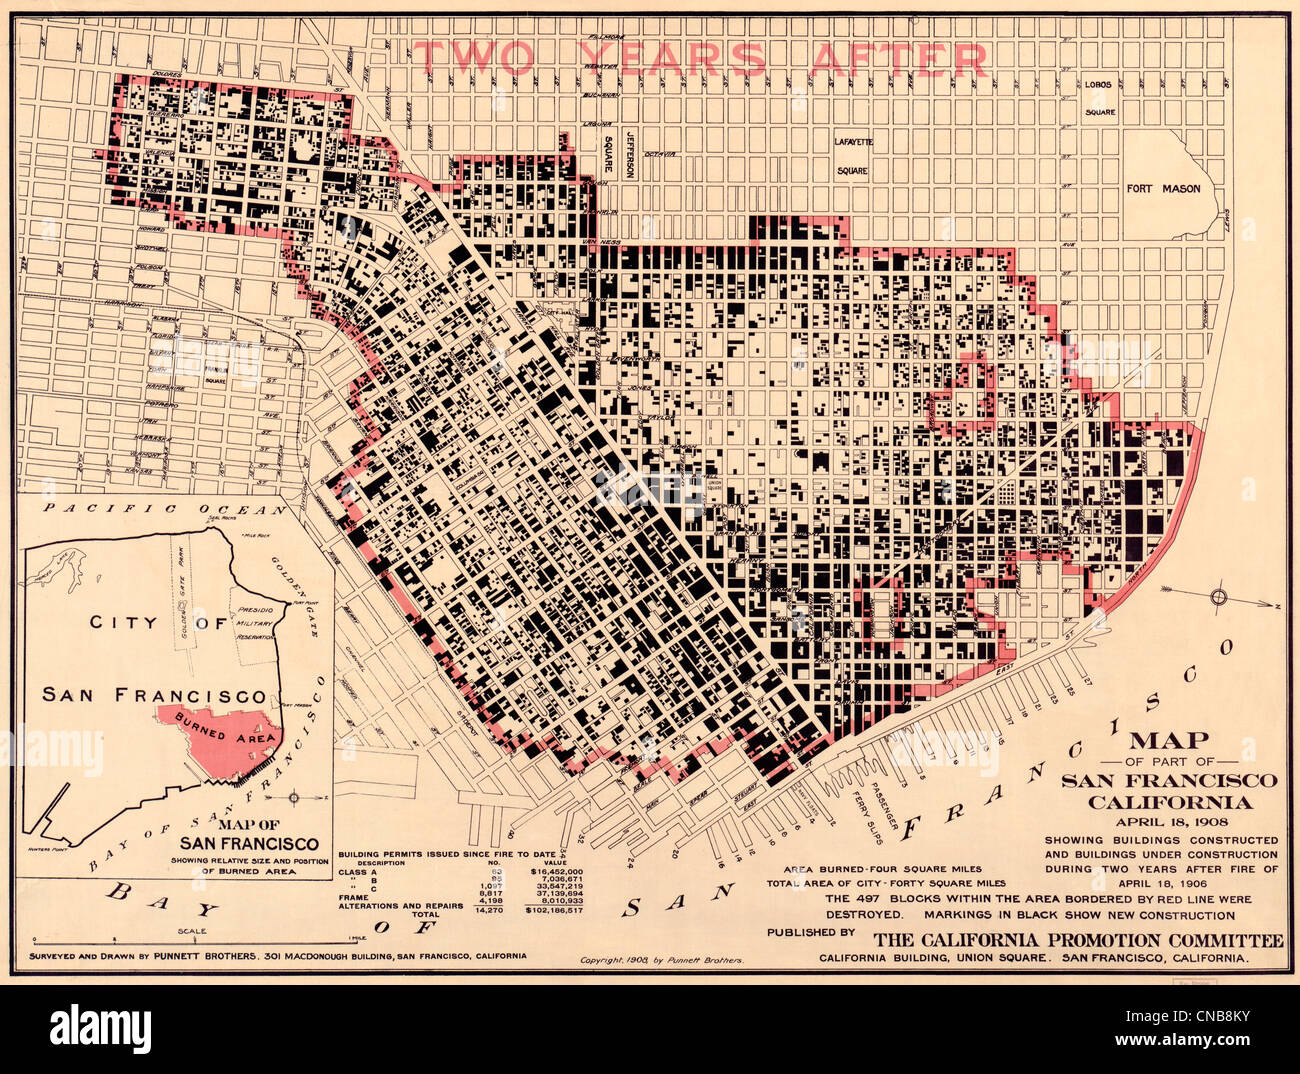 Map of part of San Francisco, California April 18, 1908 showing buildings constructed and buildings under construction during two years after fire of April 18, 1906 Stock Photo